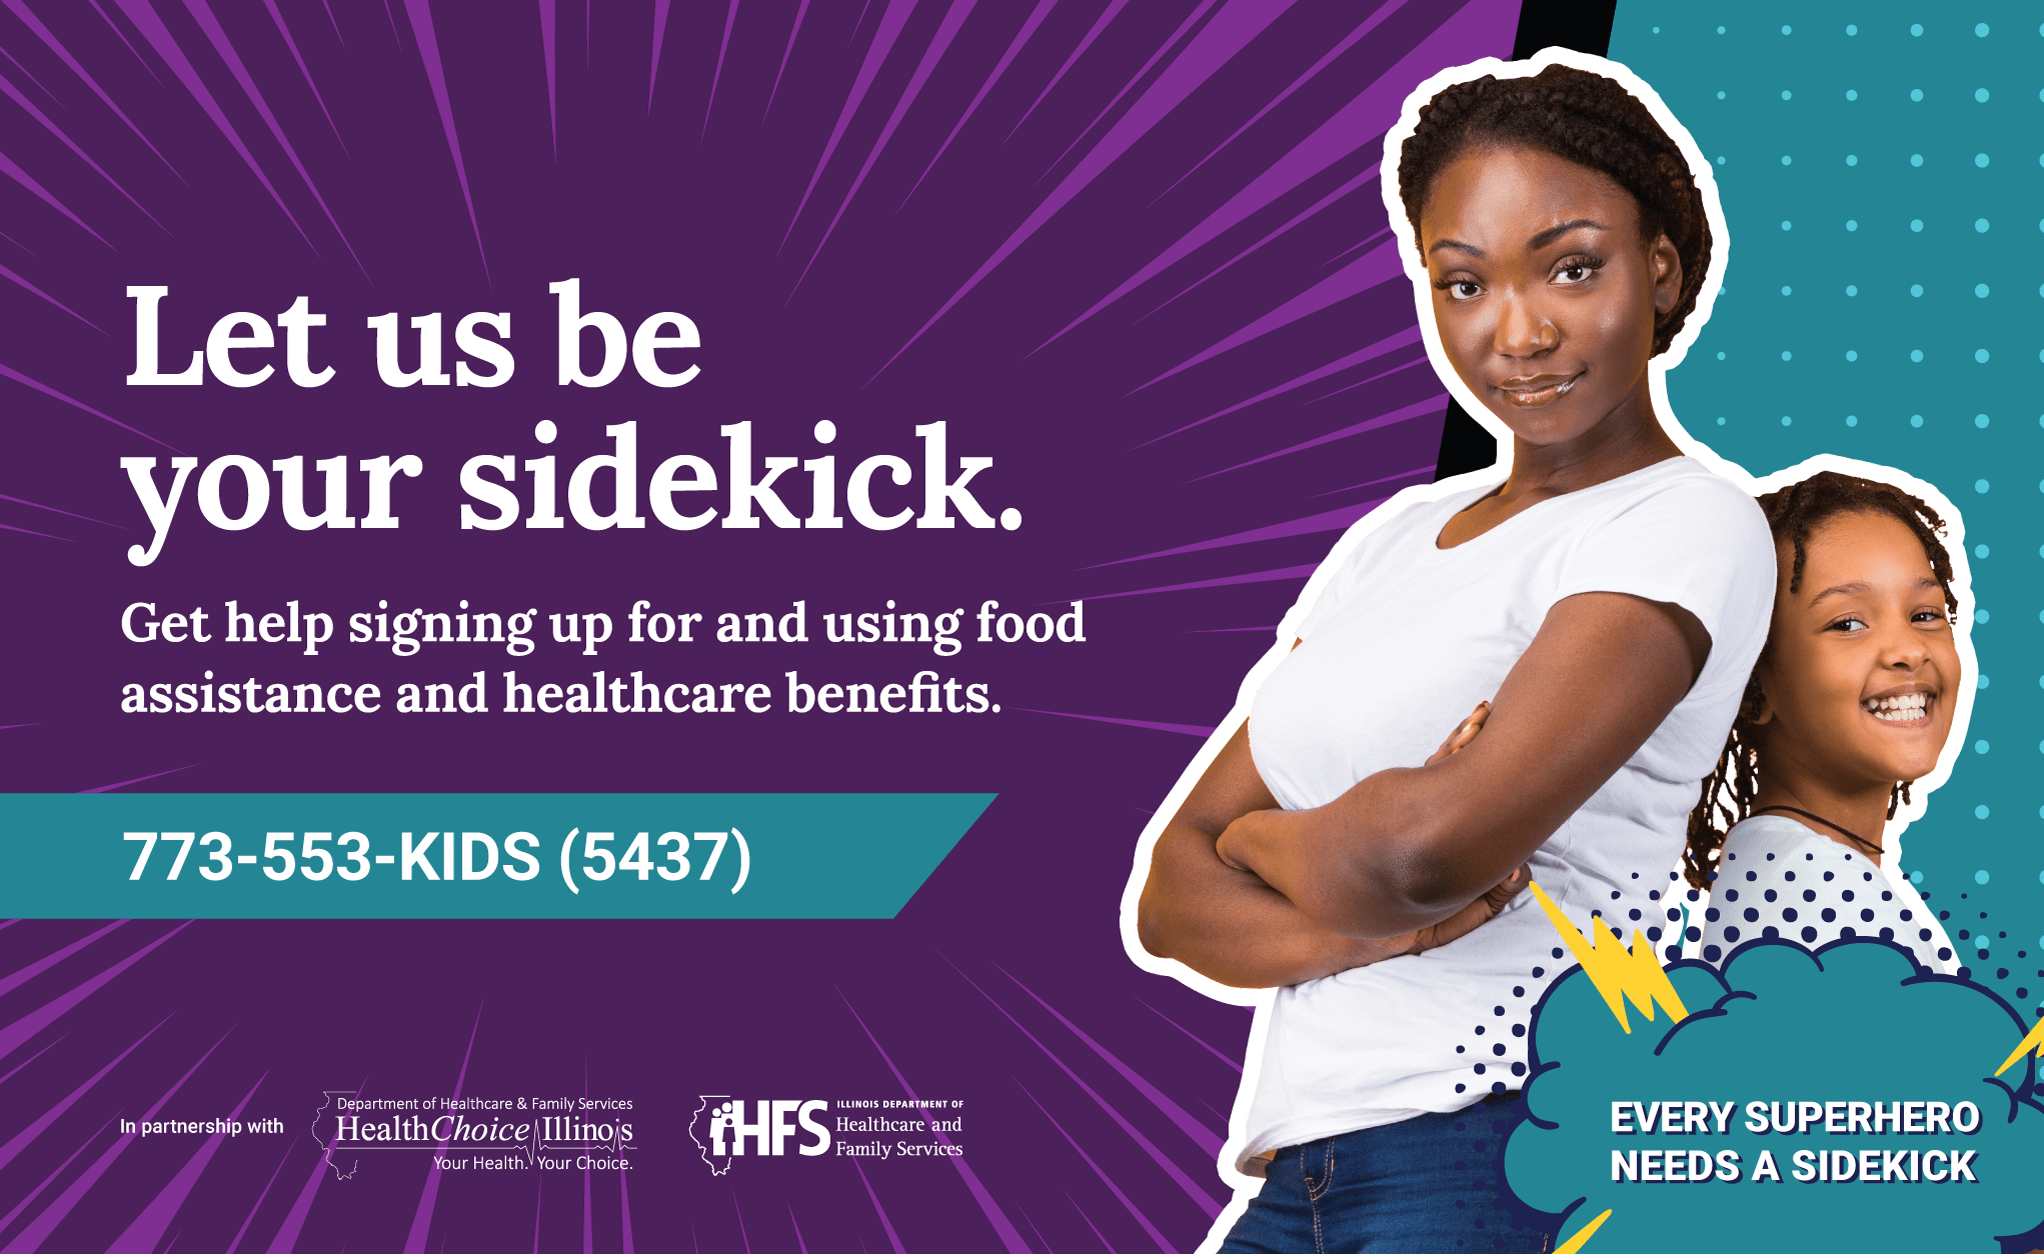 Request SNAP and Medicaid assistance at 773-553-KIDS